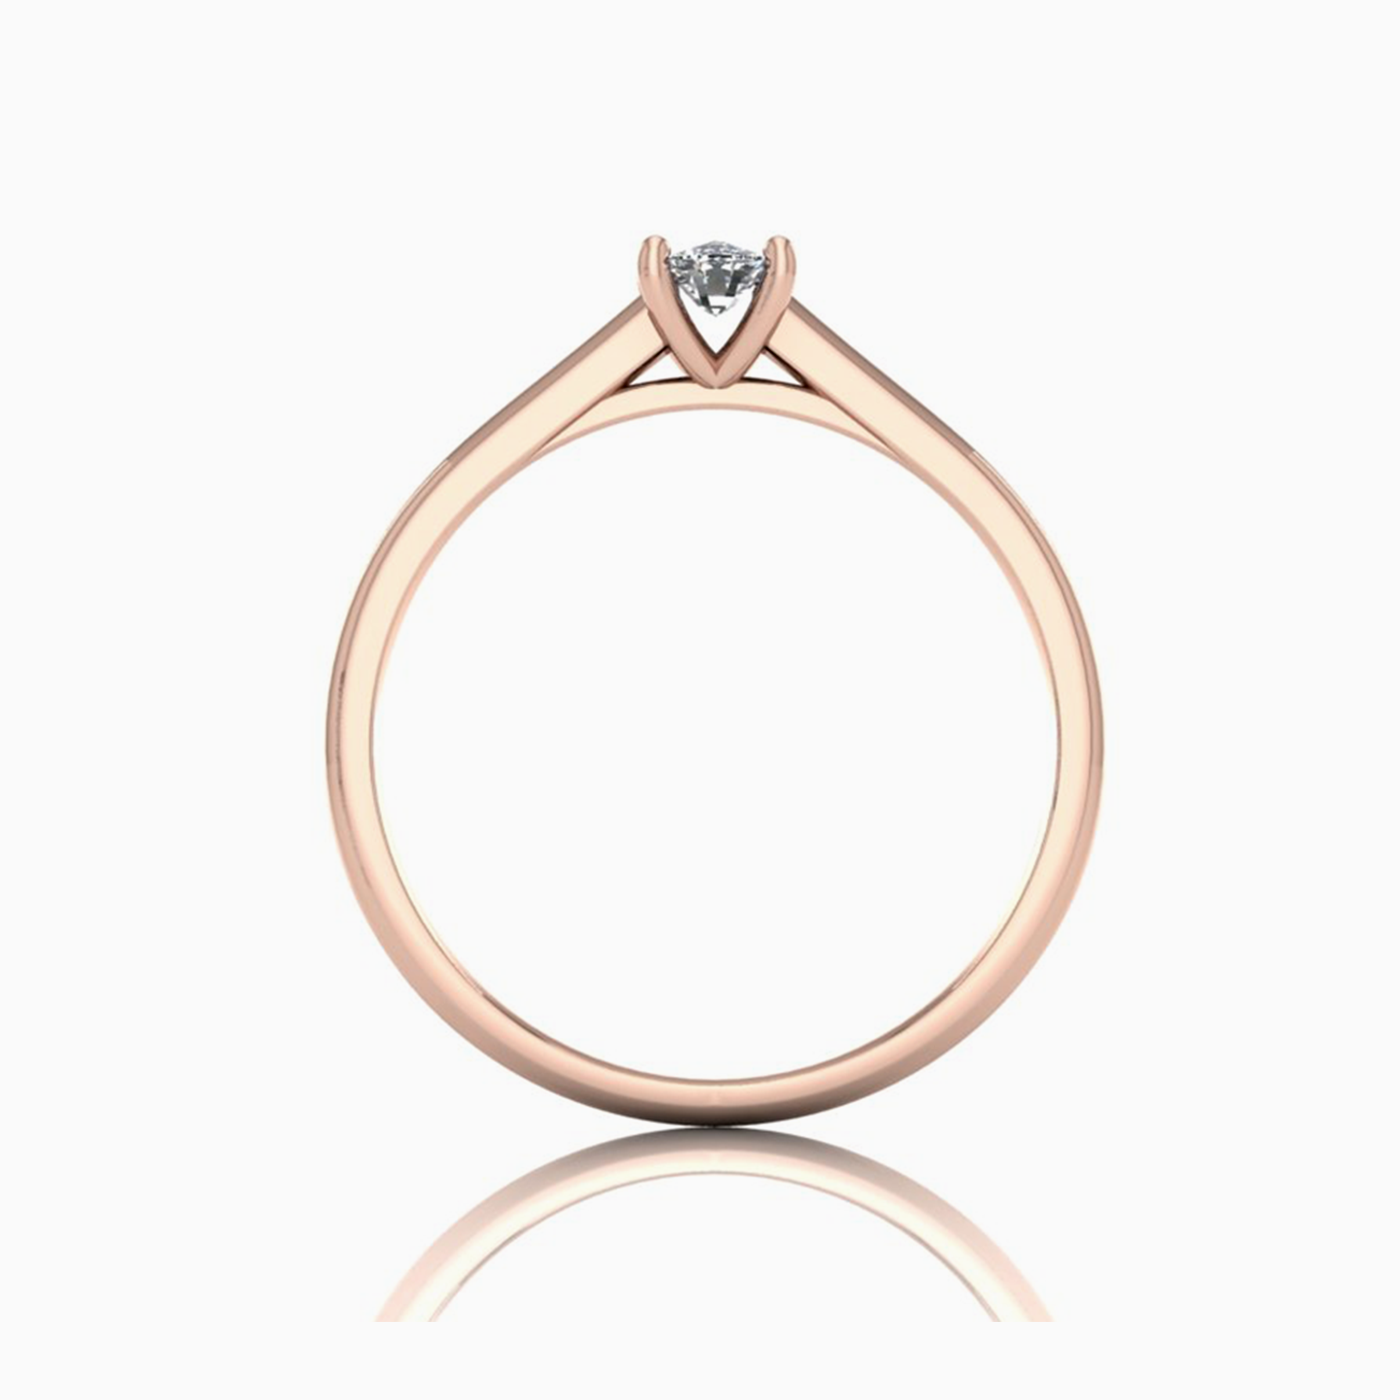 18k rose gold  0,30 ct 4 prongs solitaire elongated cushion cut diamond engagement ring with whisper thin band